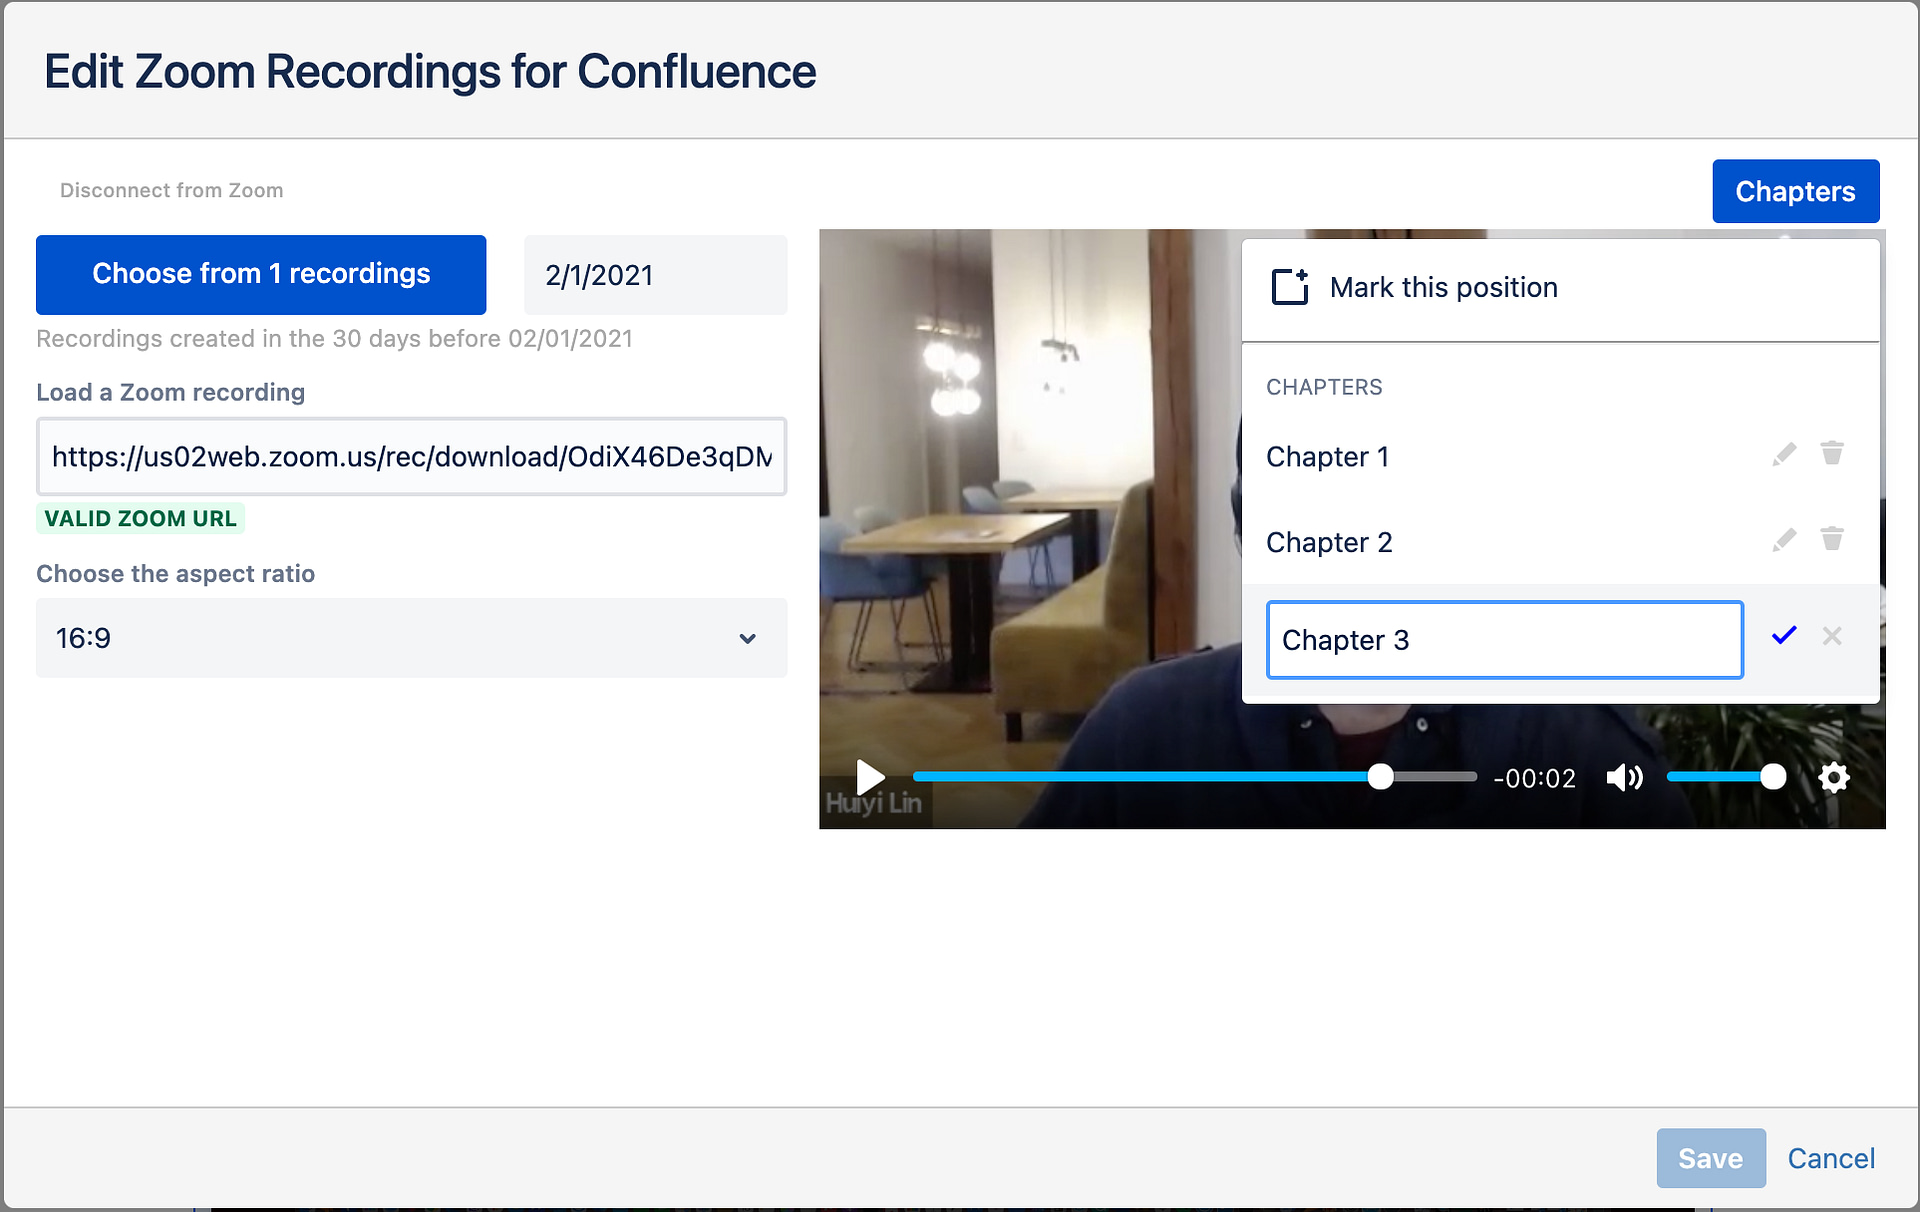 Adding Chapters in the Embed Zoom Recordings for Confluence Macro